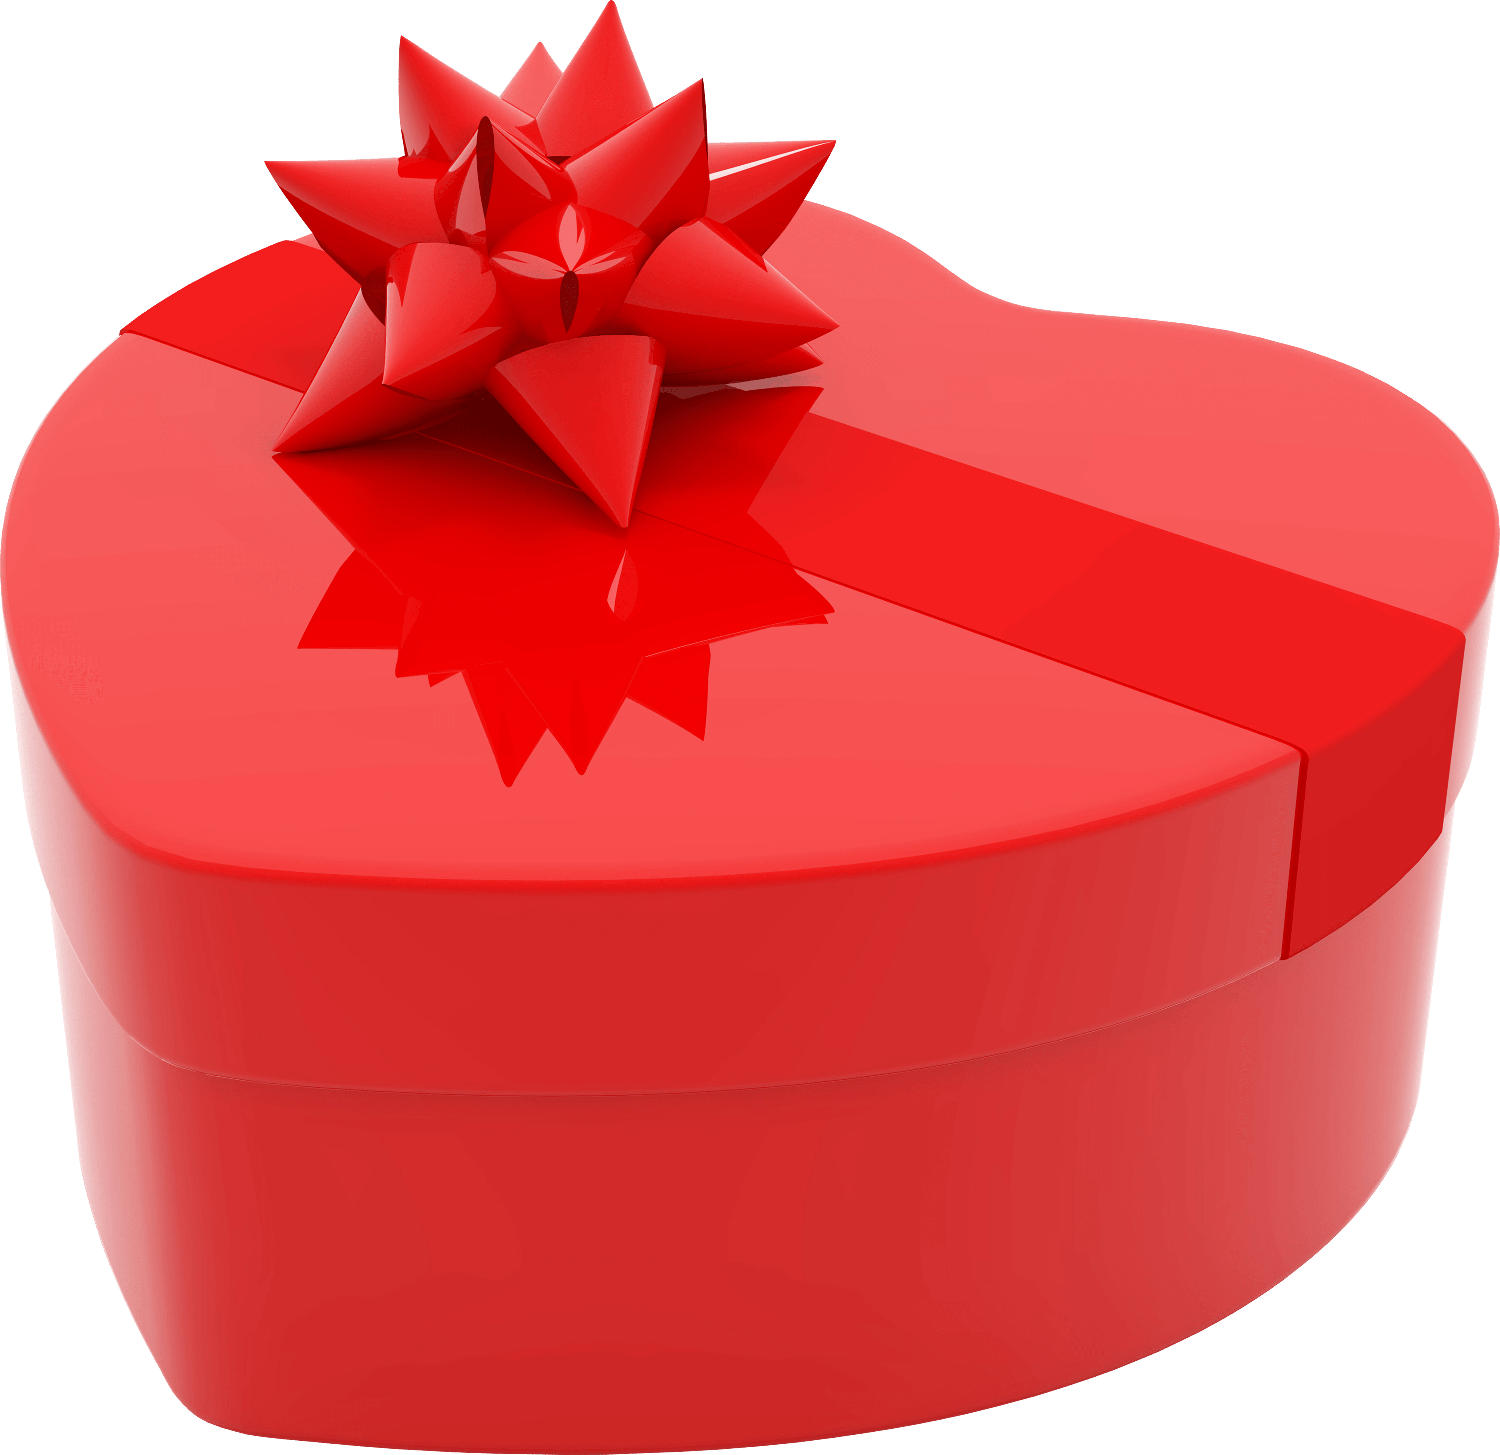 Red Heart Box Png Transparent Image (chocolate, red, salmon, black)